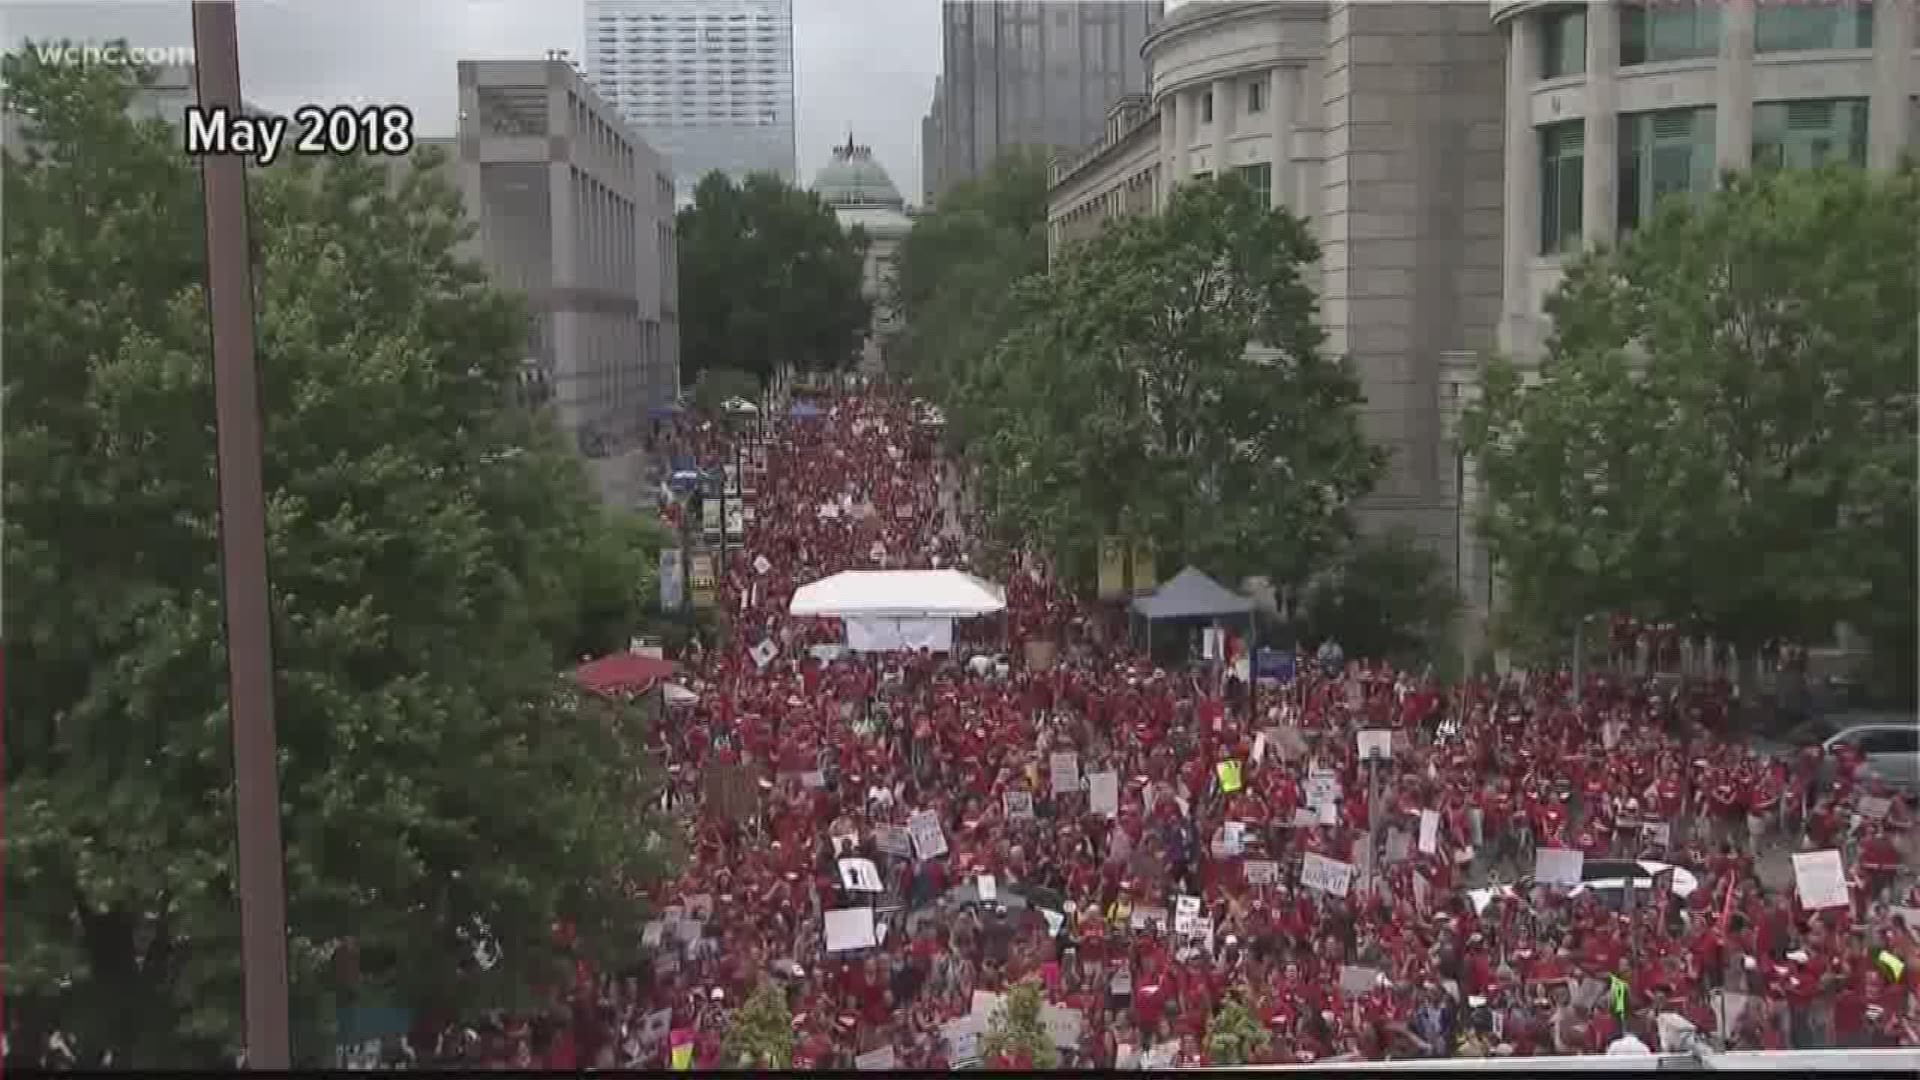 Hickory Public Schools announced May 1 will be an optional workday. Thousands of teachers are expected to march in Raleigh, with a list of demands for lawmakers.